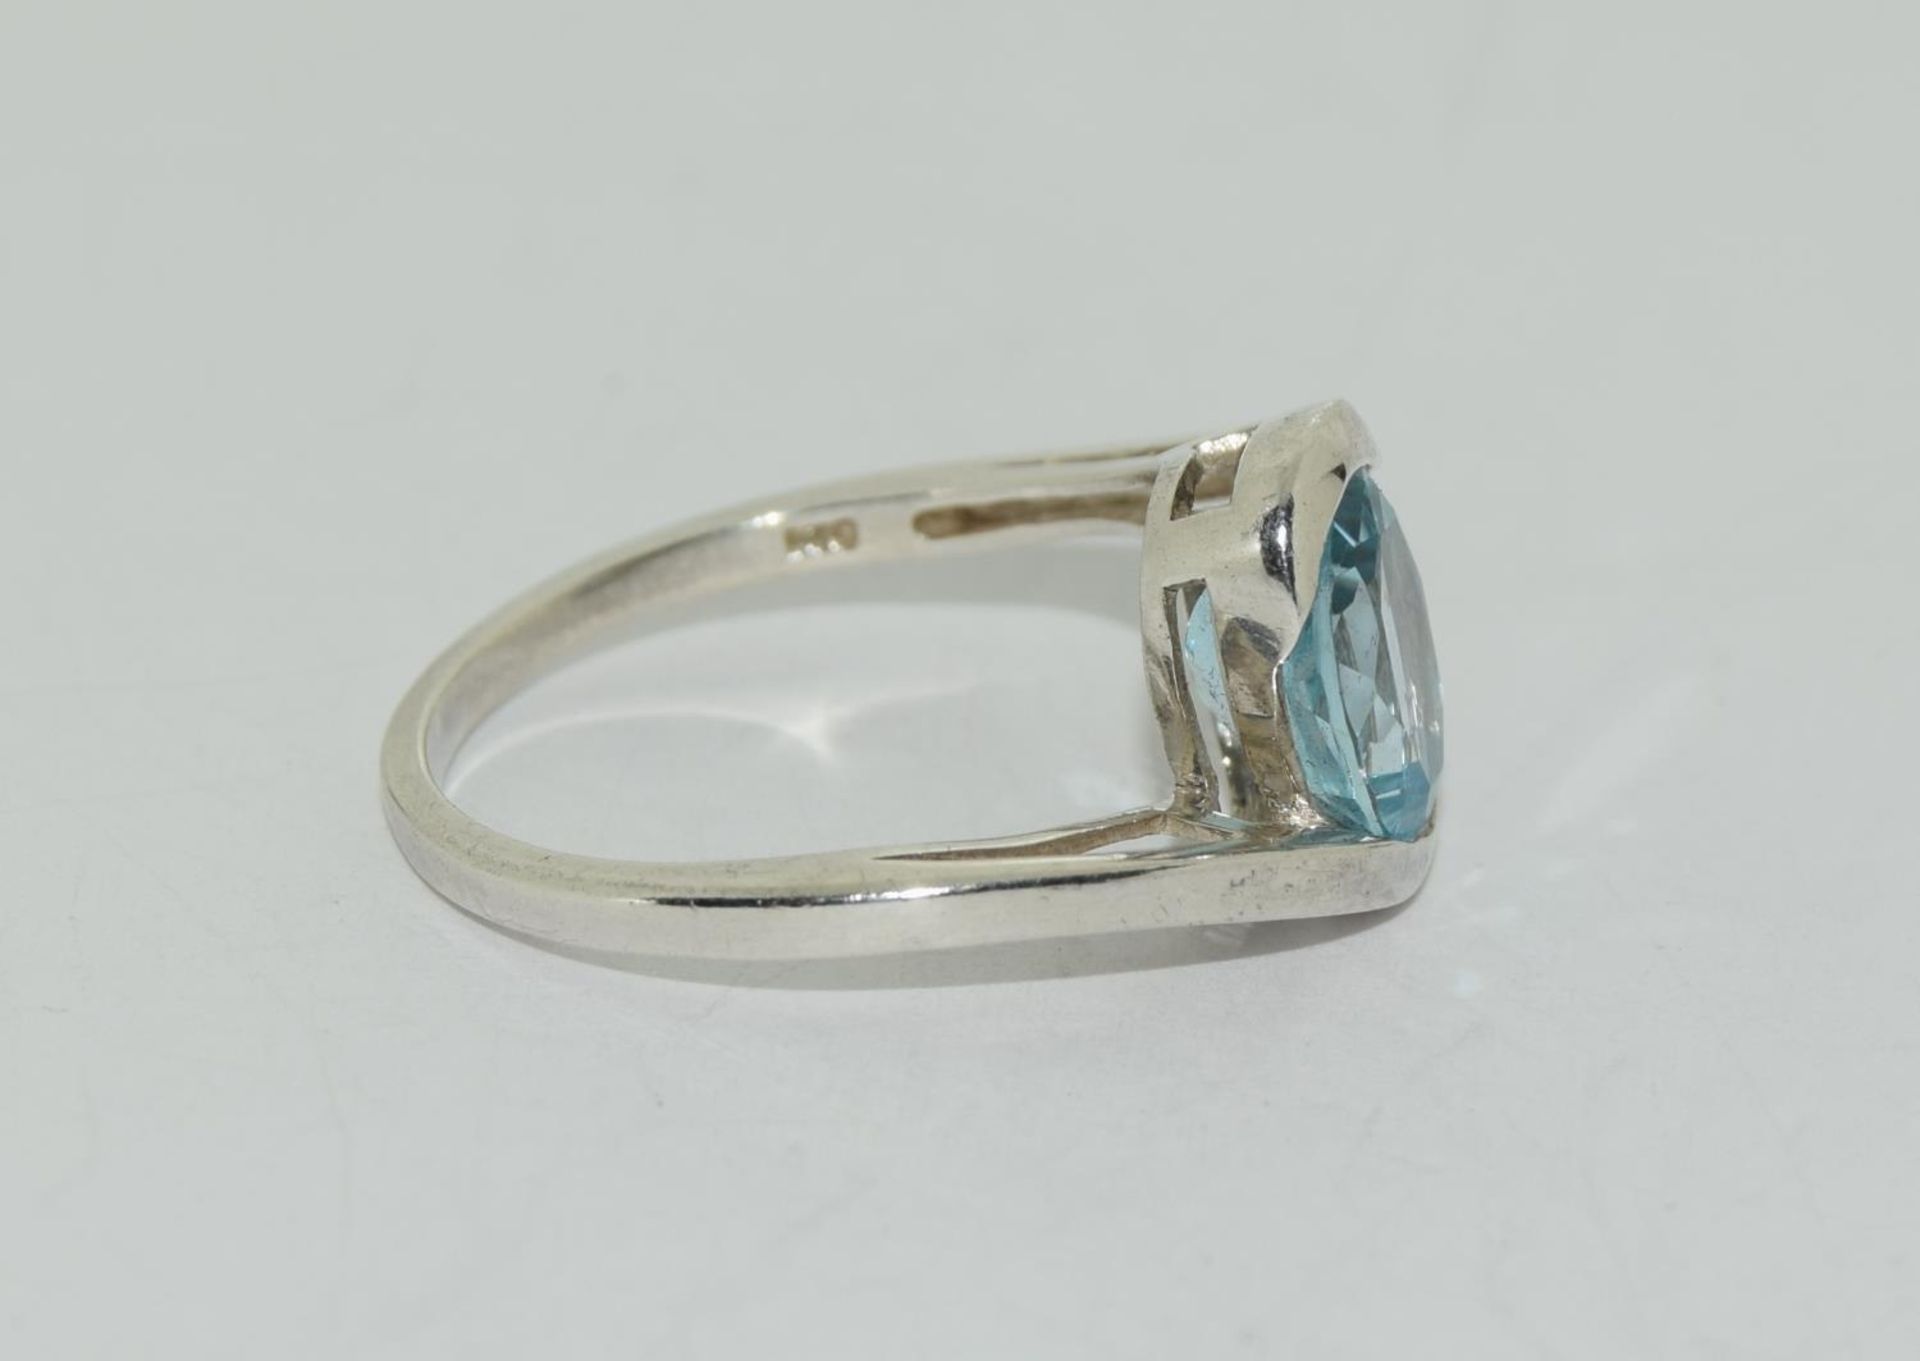 Lovely ice blue topaz 925 silver solitaire ring. Size P 1/2. - Image 2 of 3